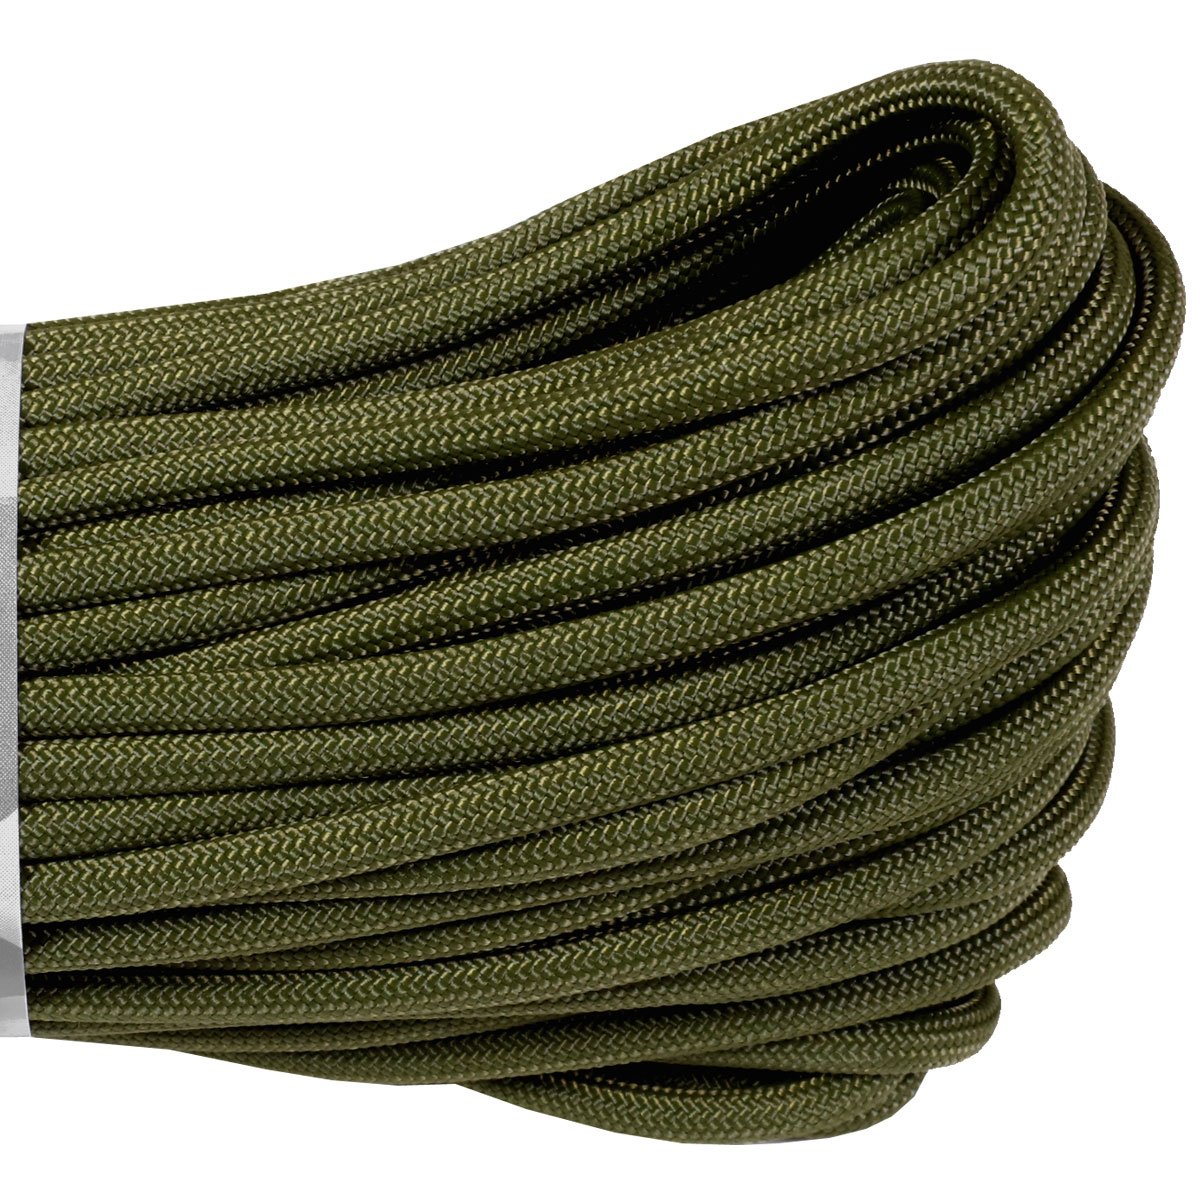 Atwood 550 Paracord - Olive Drab